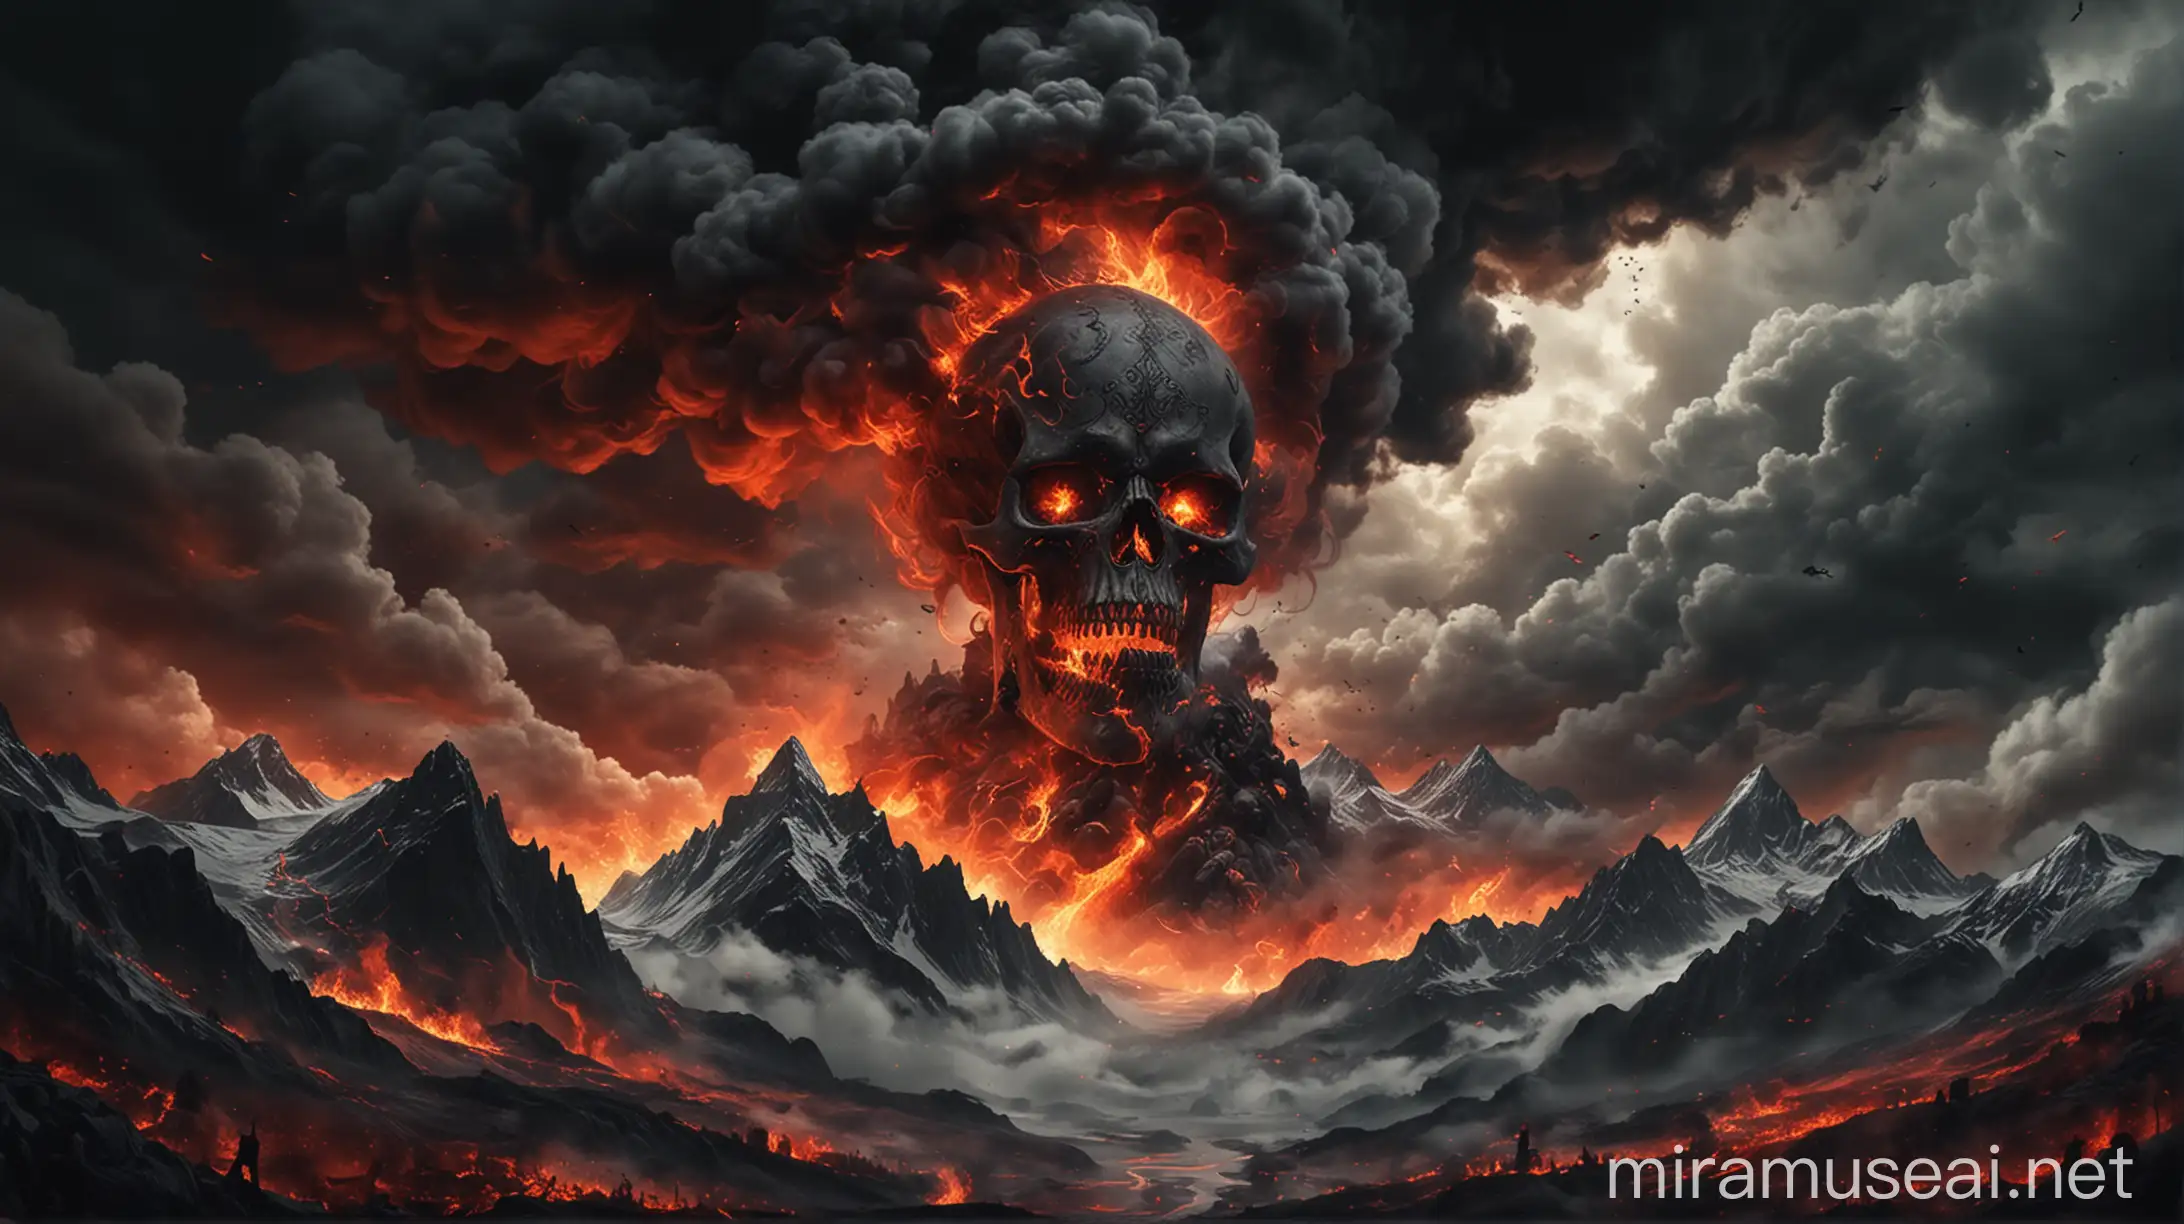 
Flames and smoke swirl in the sky, forming dark clouds. Distant mountains can be seen in the background.
You can use Viking or Gothic motifs on the cover, such as skeletons, skulls, runic symbols.
The colors should be dark and gloomy, mainly shades of red, black and gray.
The mood should be intense, dramatic and mysterious.